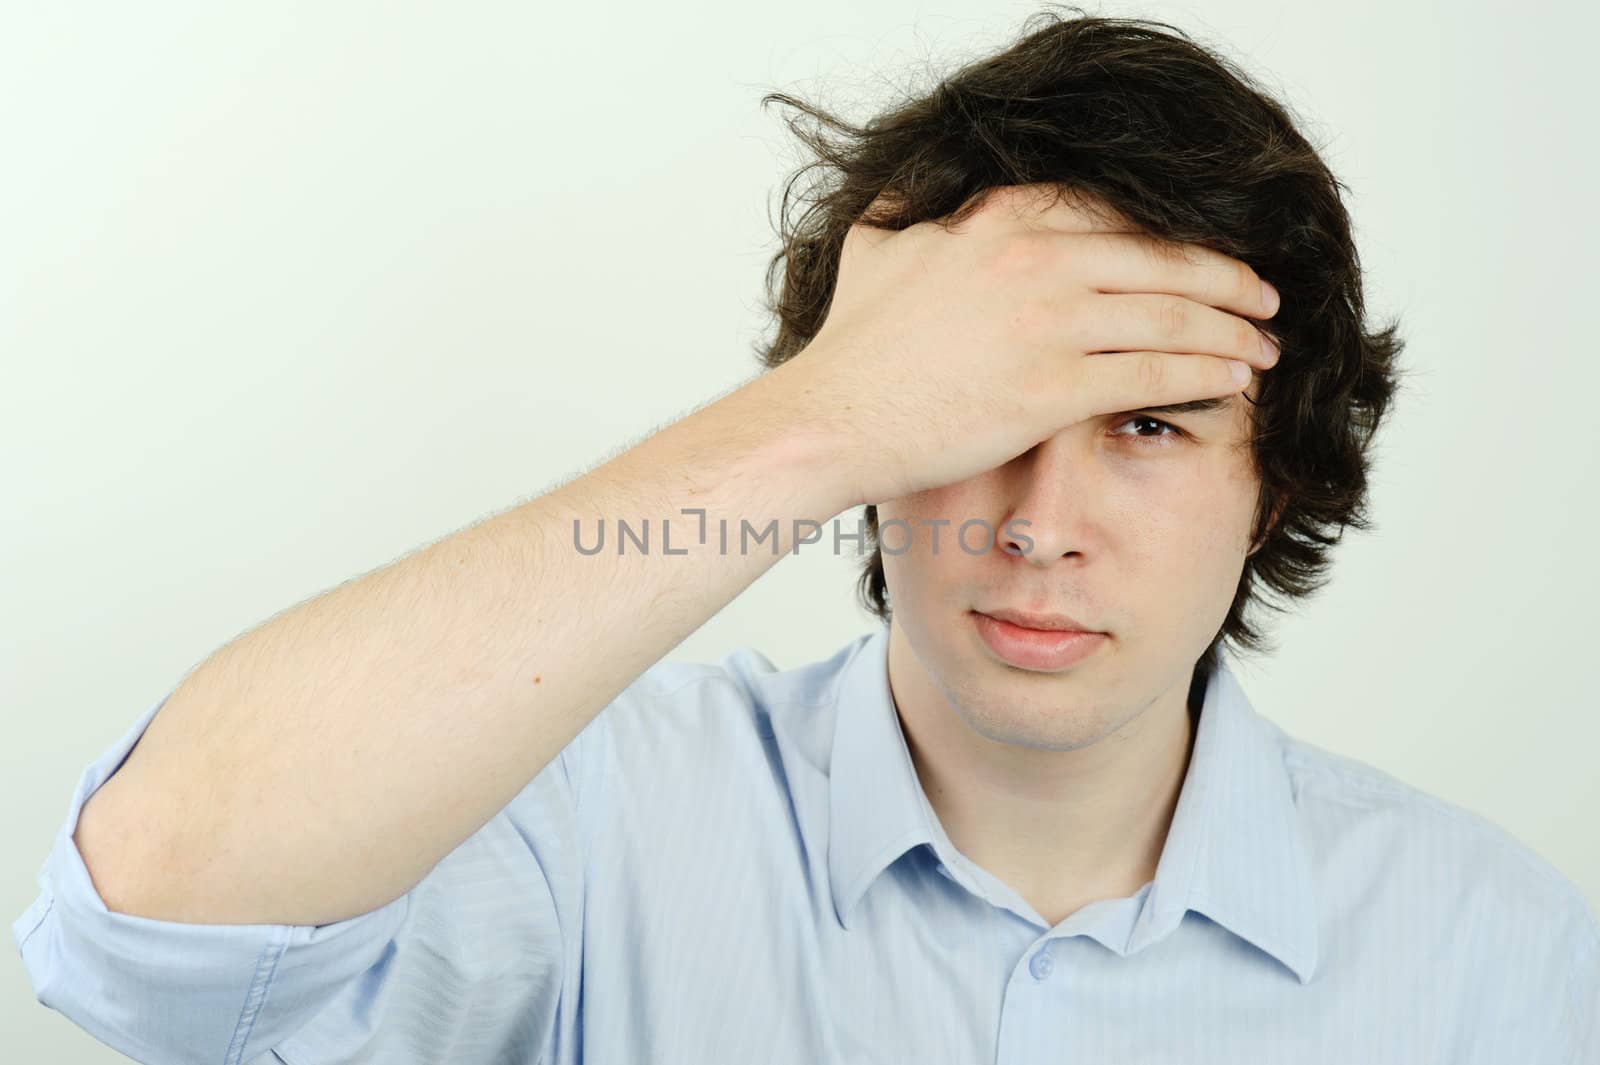 An image of a young man thinking  about something